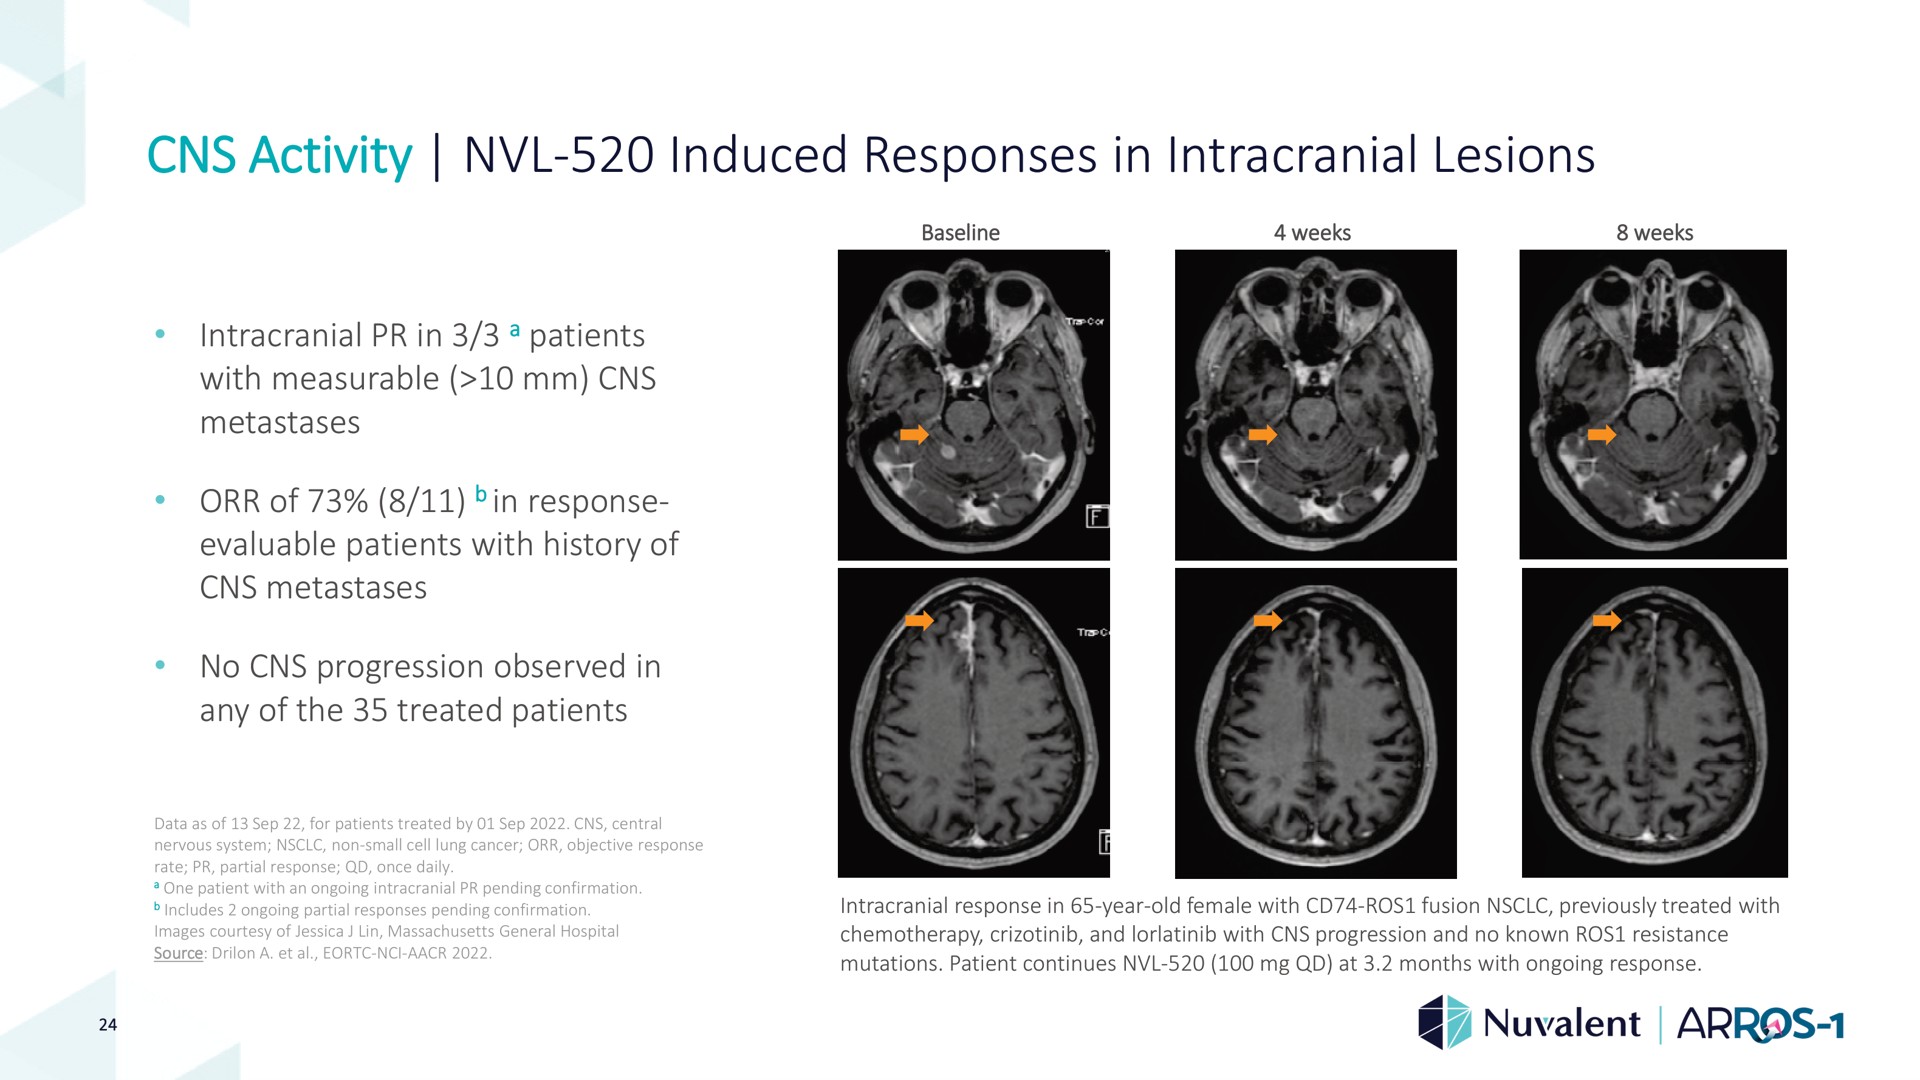 activity induced responses in intracranial lesions | Nuvalent